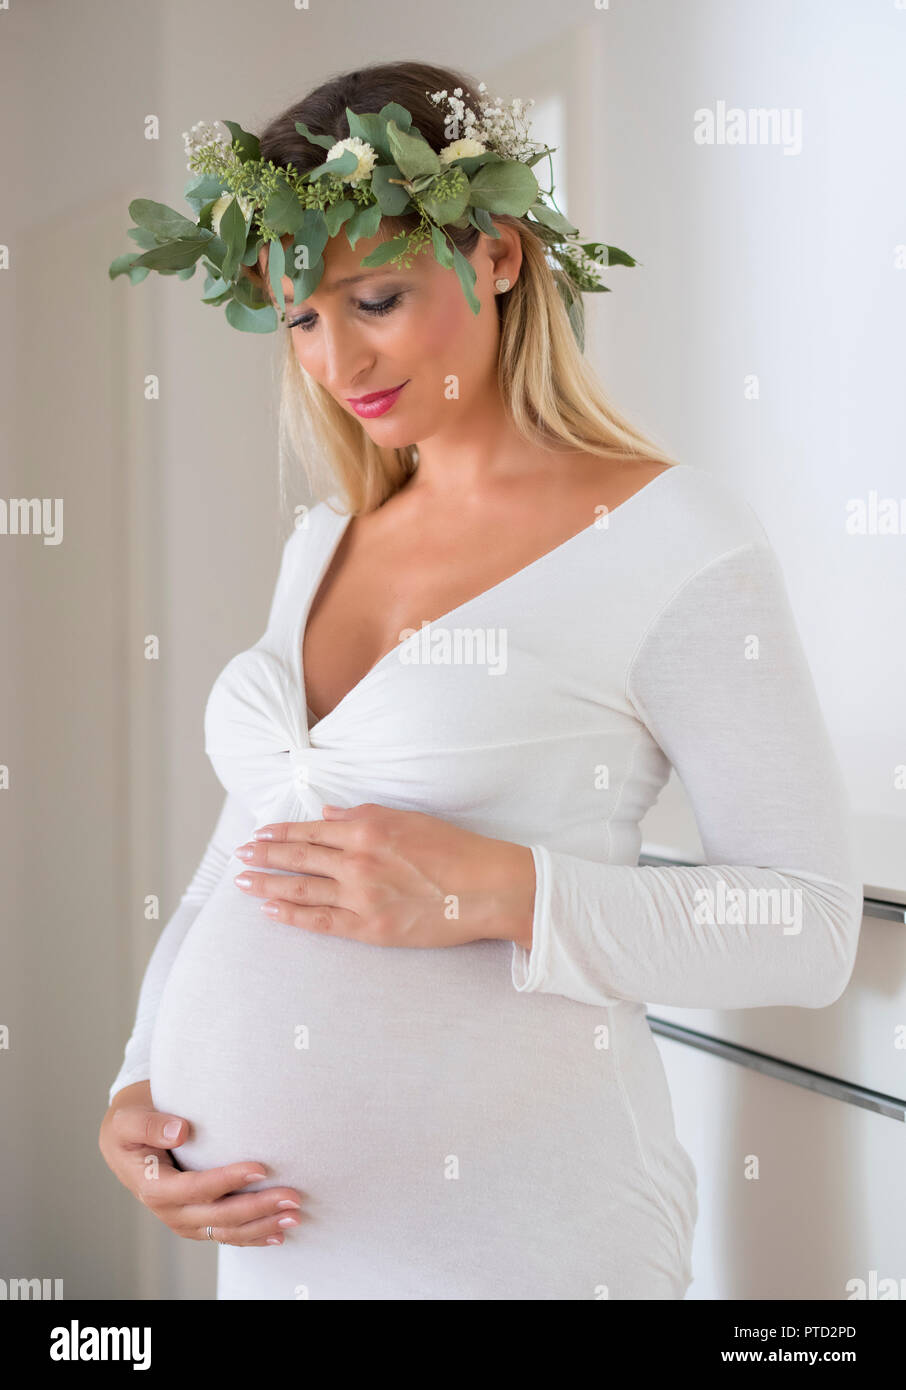 Woman, bride, with wreath of flowers, nine months pregnant, holding pregnat belly with her hands, Germany Stock Photo